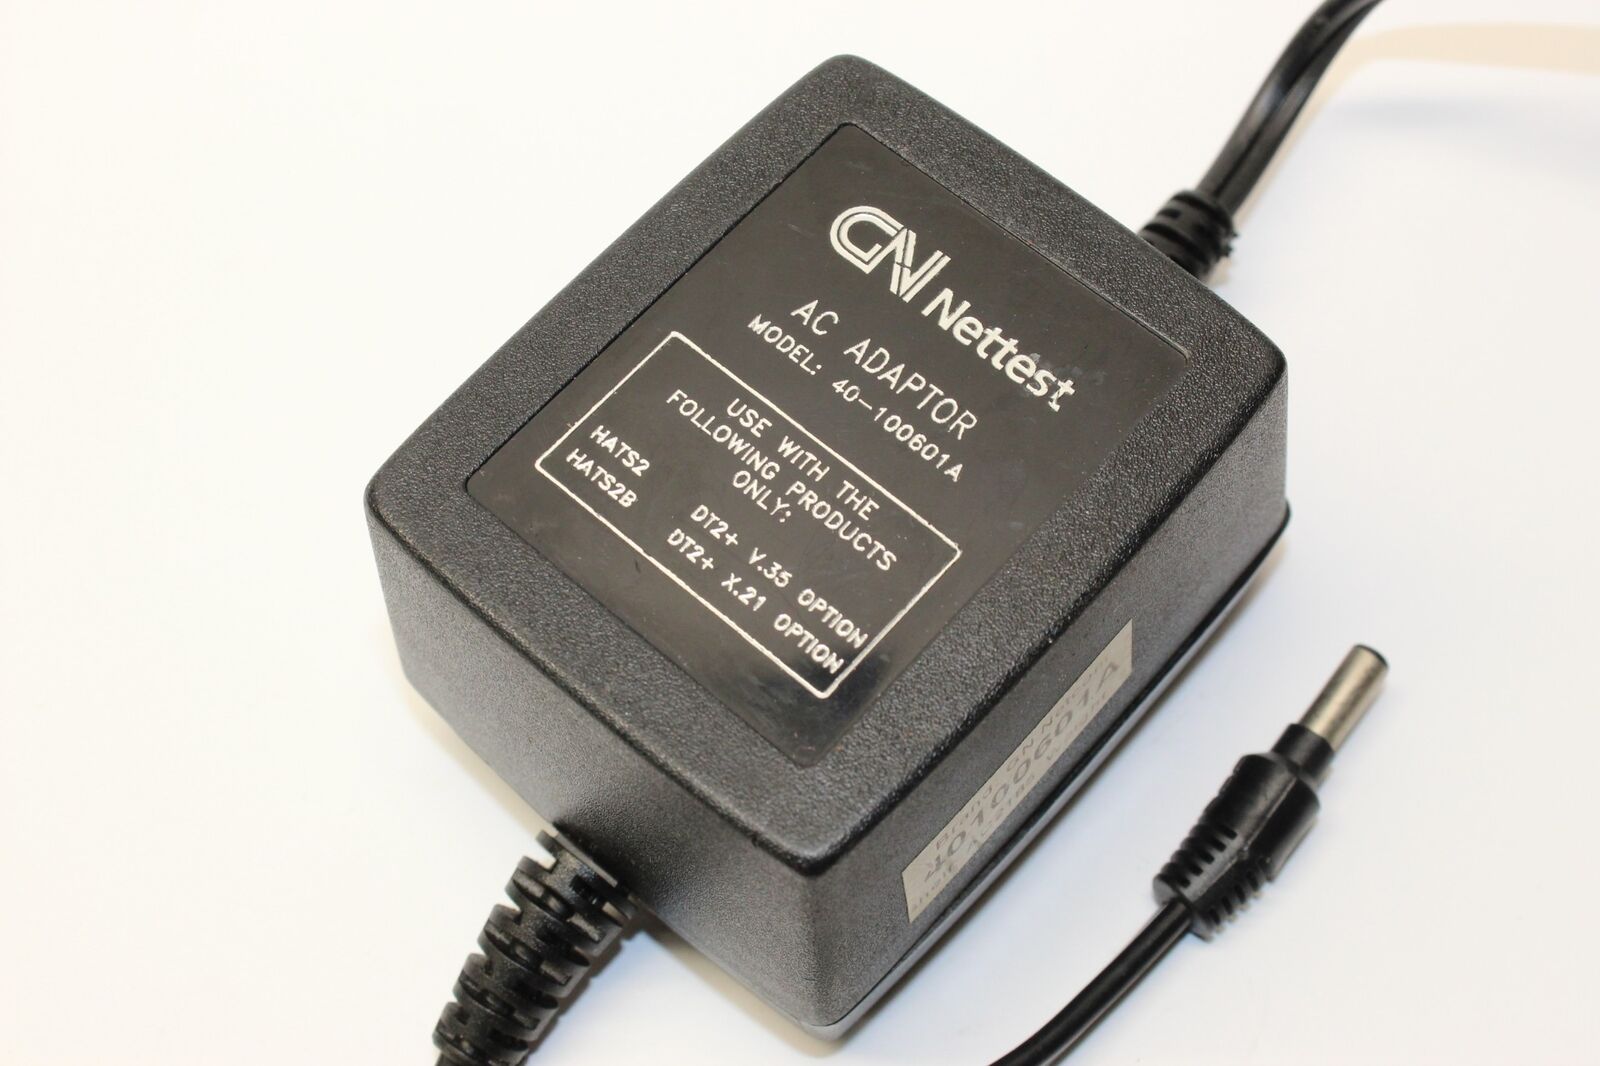 Genuine GN Nettest 40-100601A Power Supply AC Adapter Output DC 9.5V 1.5A Brand: GN Nettest Type